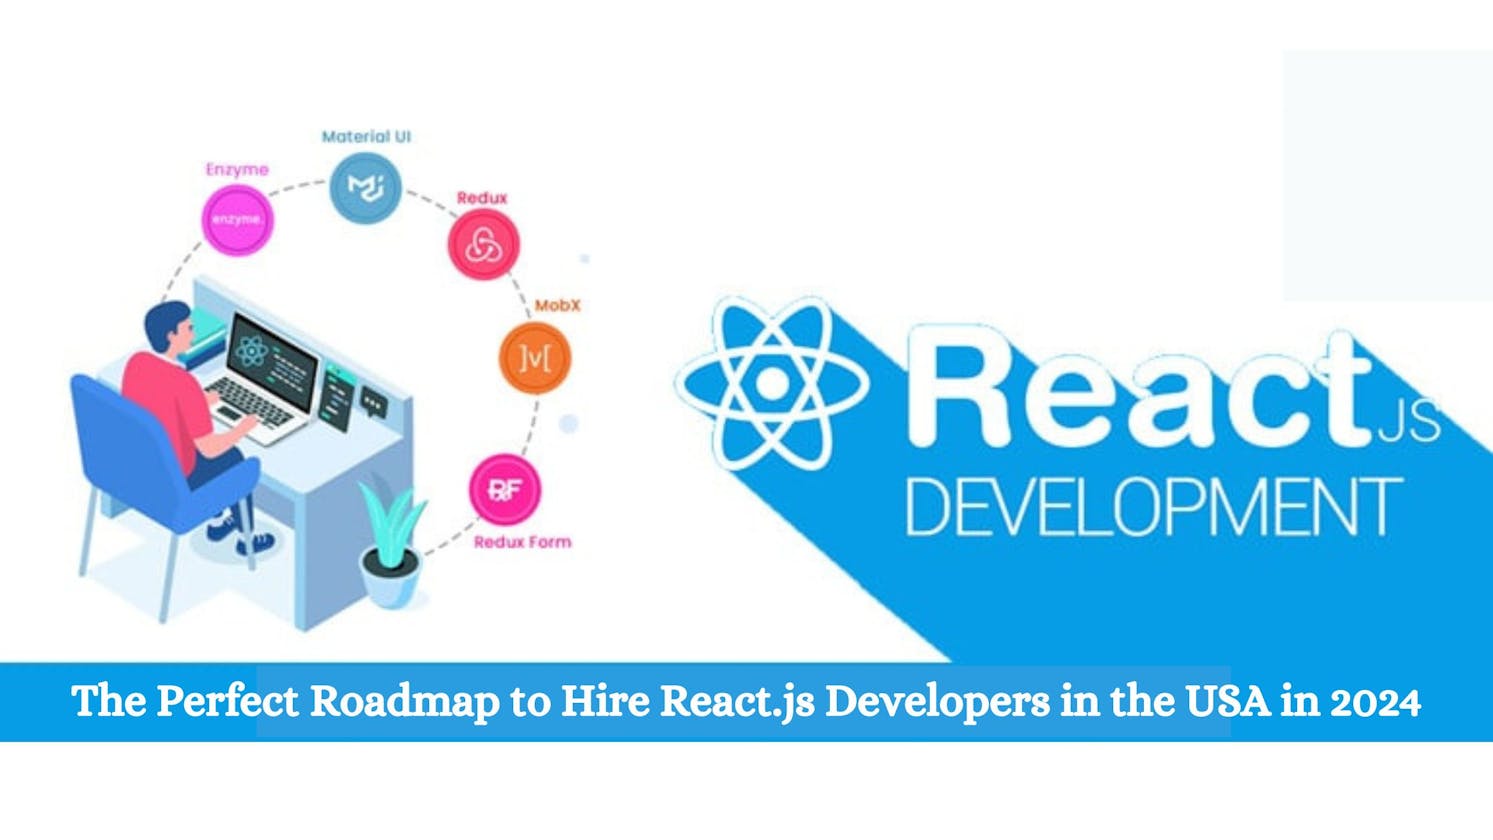 The Perfect Roadmap to Hire React.js Developers in the USA in 2024